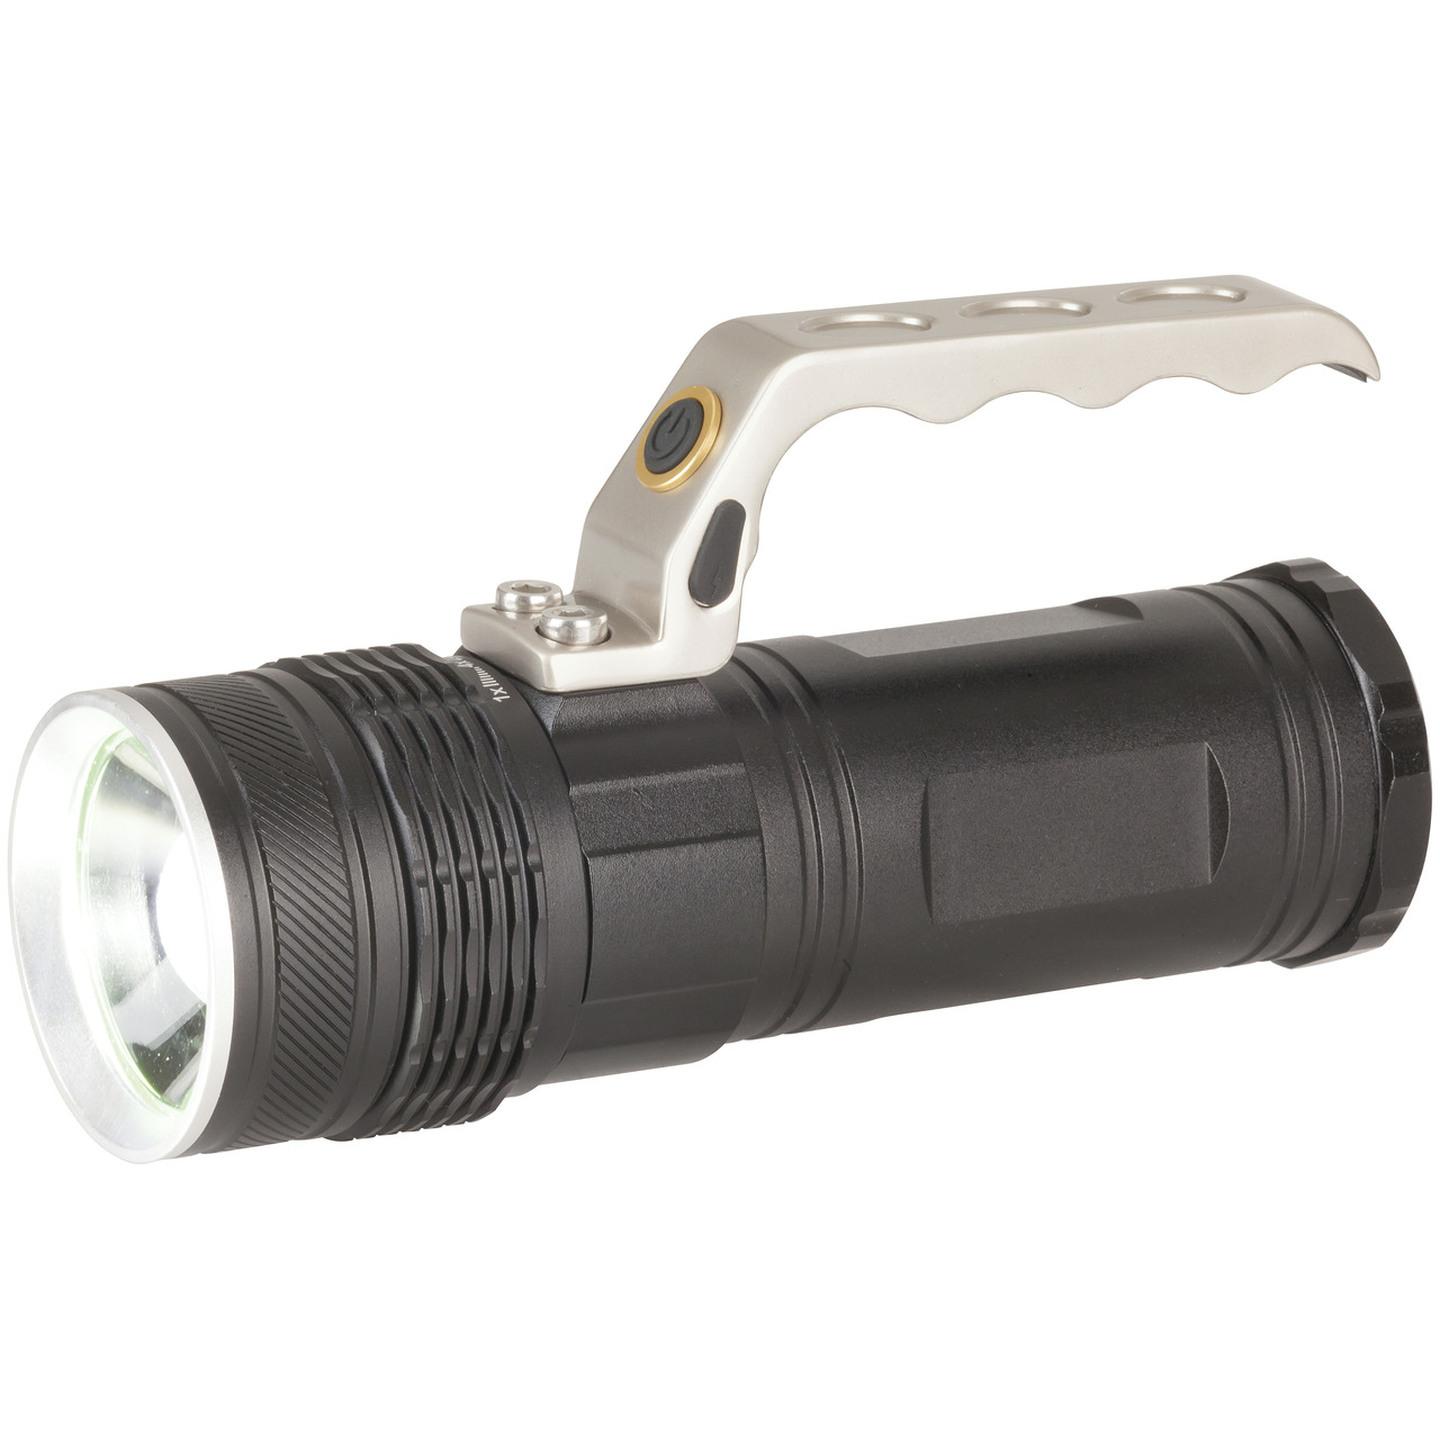 600 Lumen Rechargeable LED Spotlight with Adjustable Beam and Cree XML LED